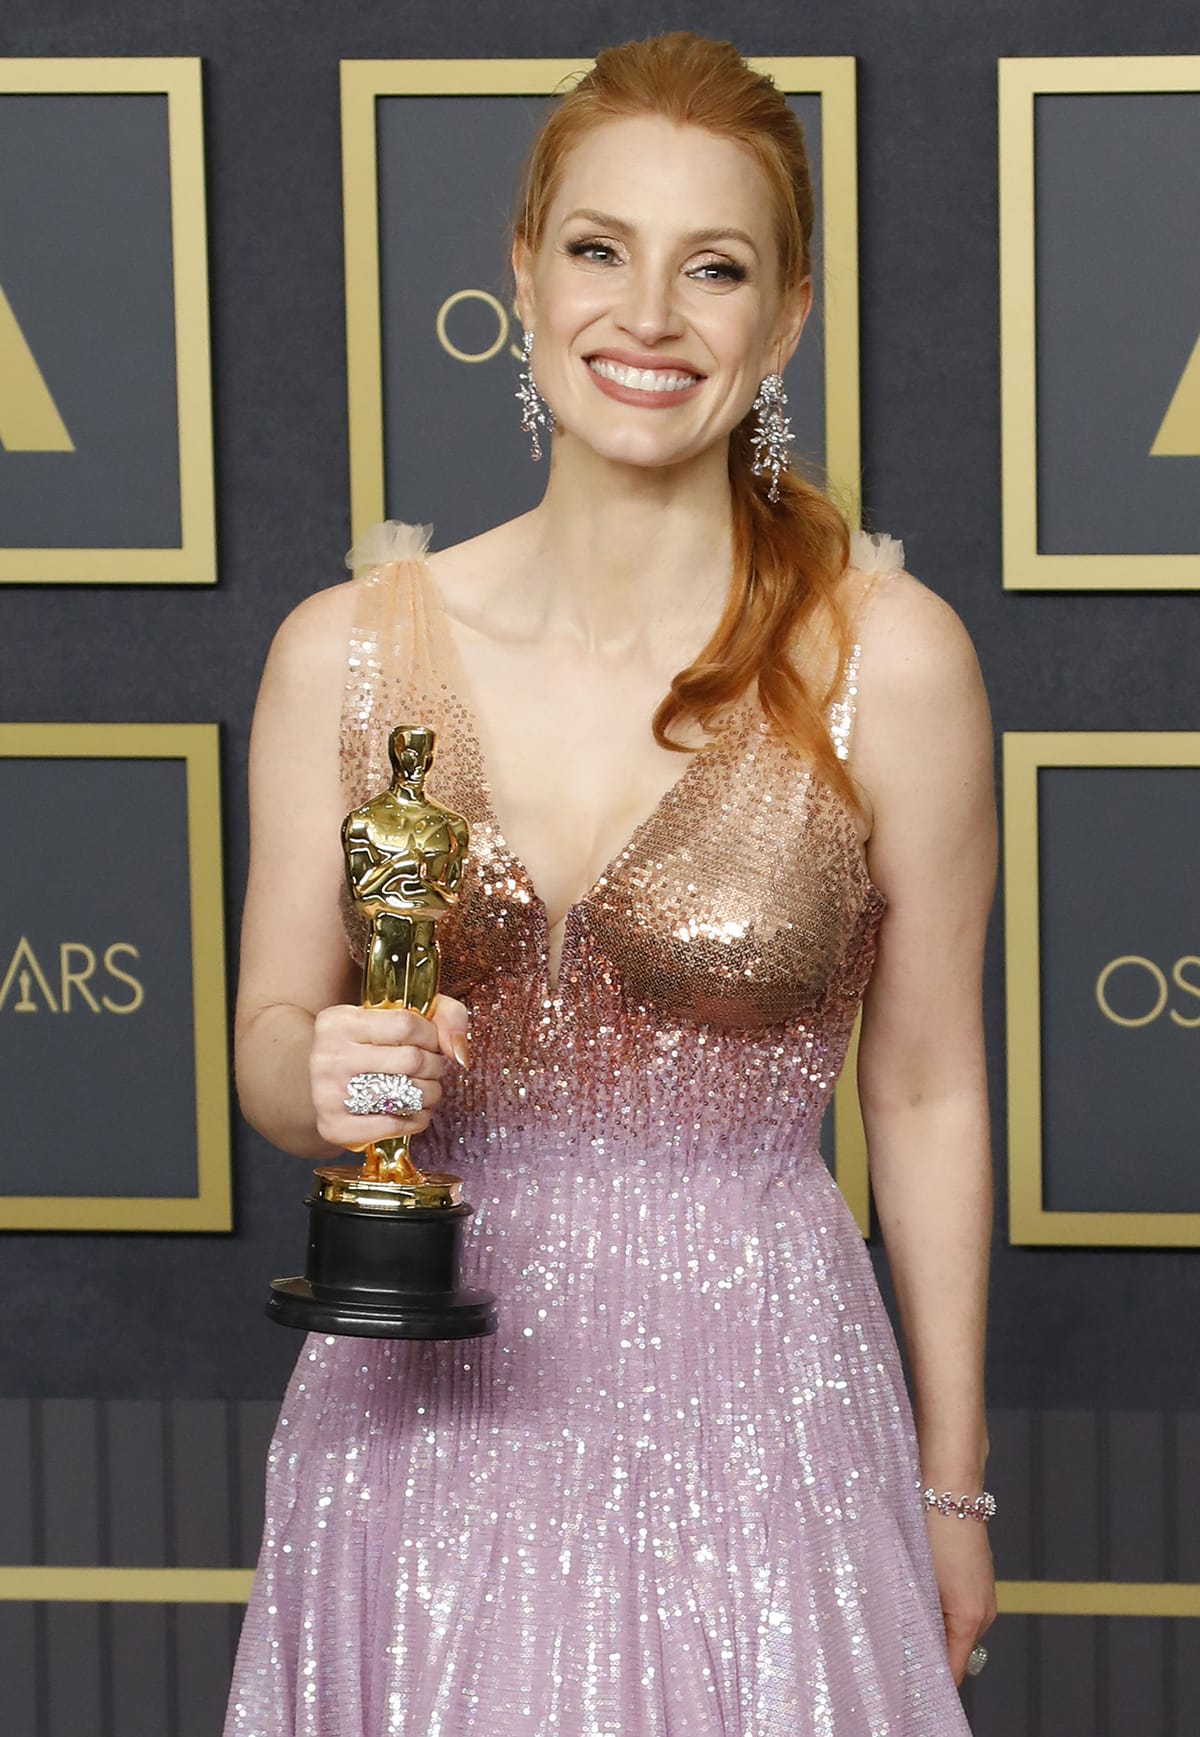 Jessica Chastain shows off her Oscar for Best Actress trophy while clad in a custom Gucci gown at the 94th Academy Awards on March 27, 2022